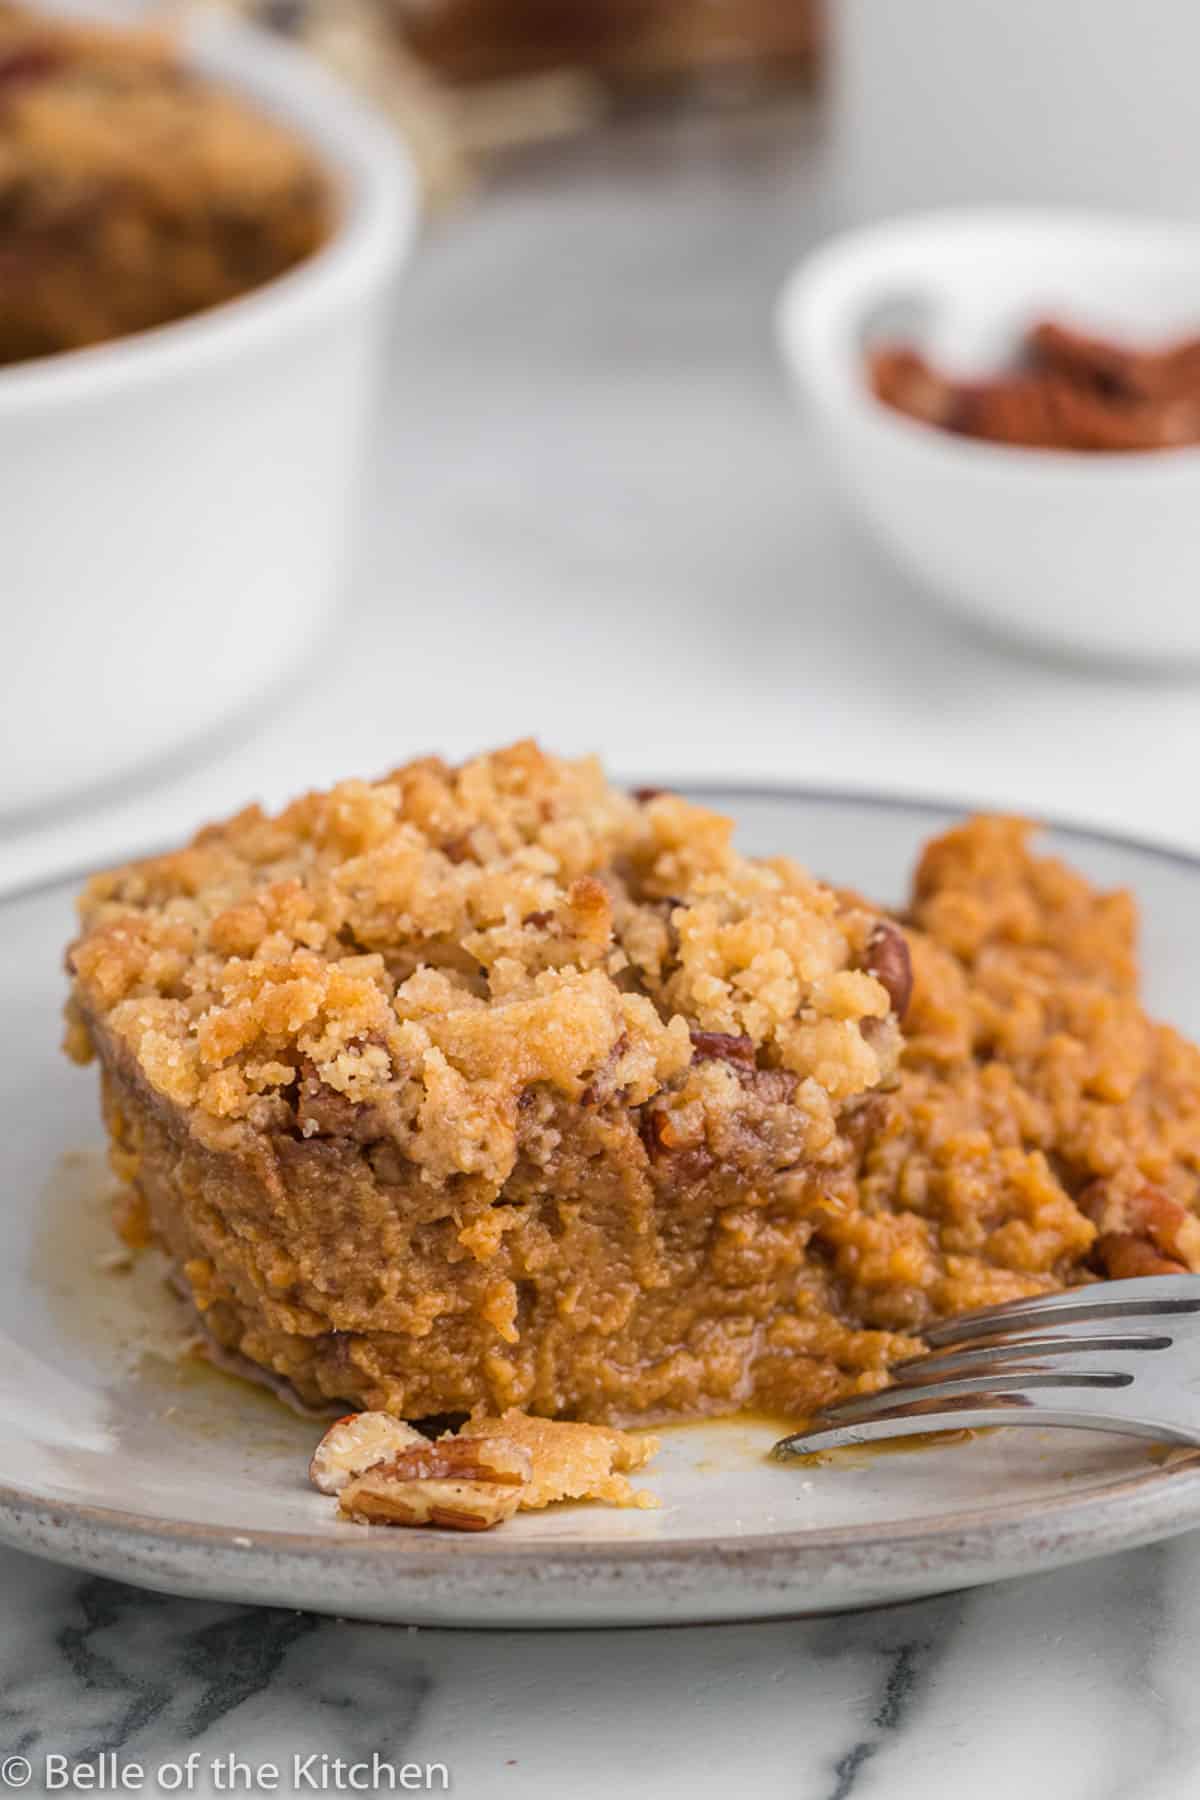 a casserole of sweet potatoes and pecan on a plate with a fork